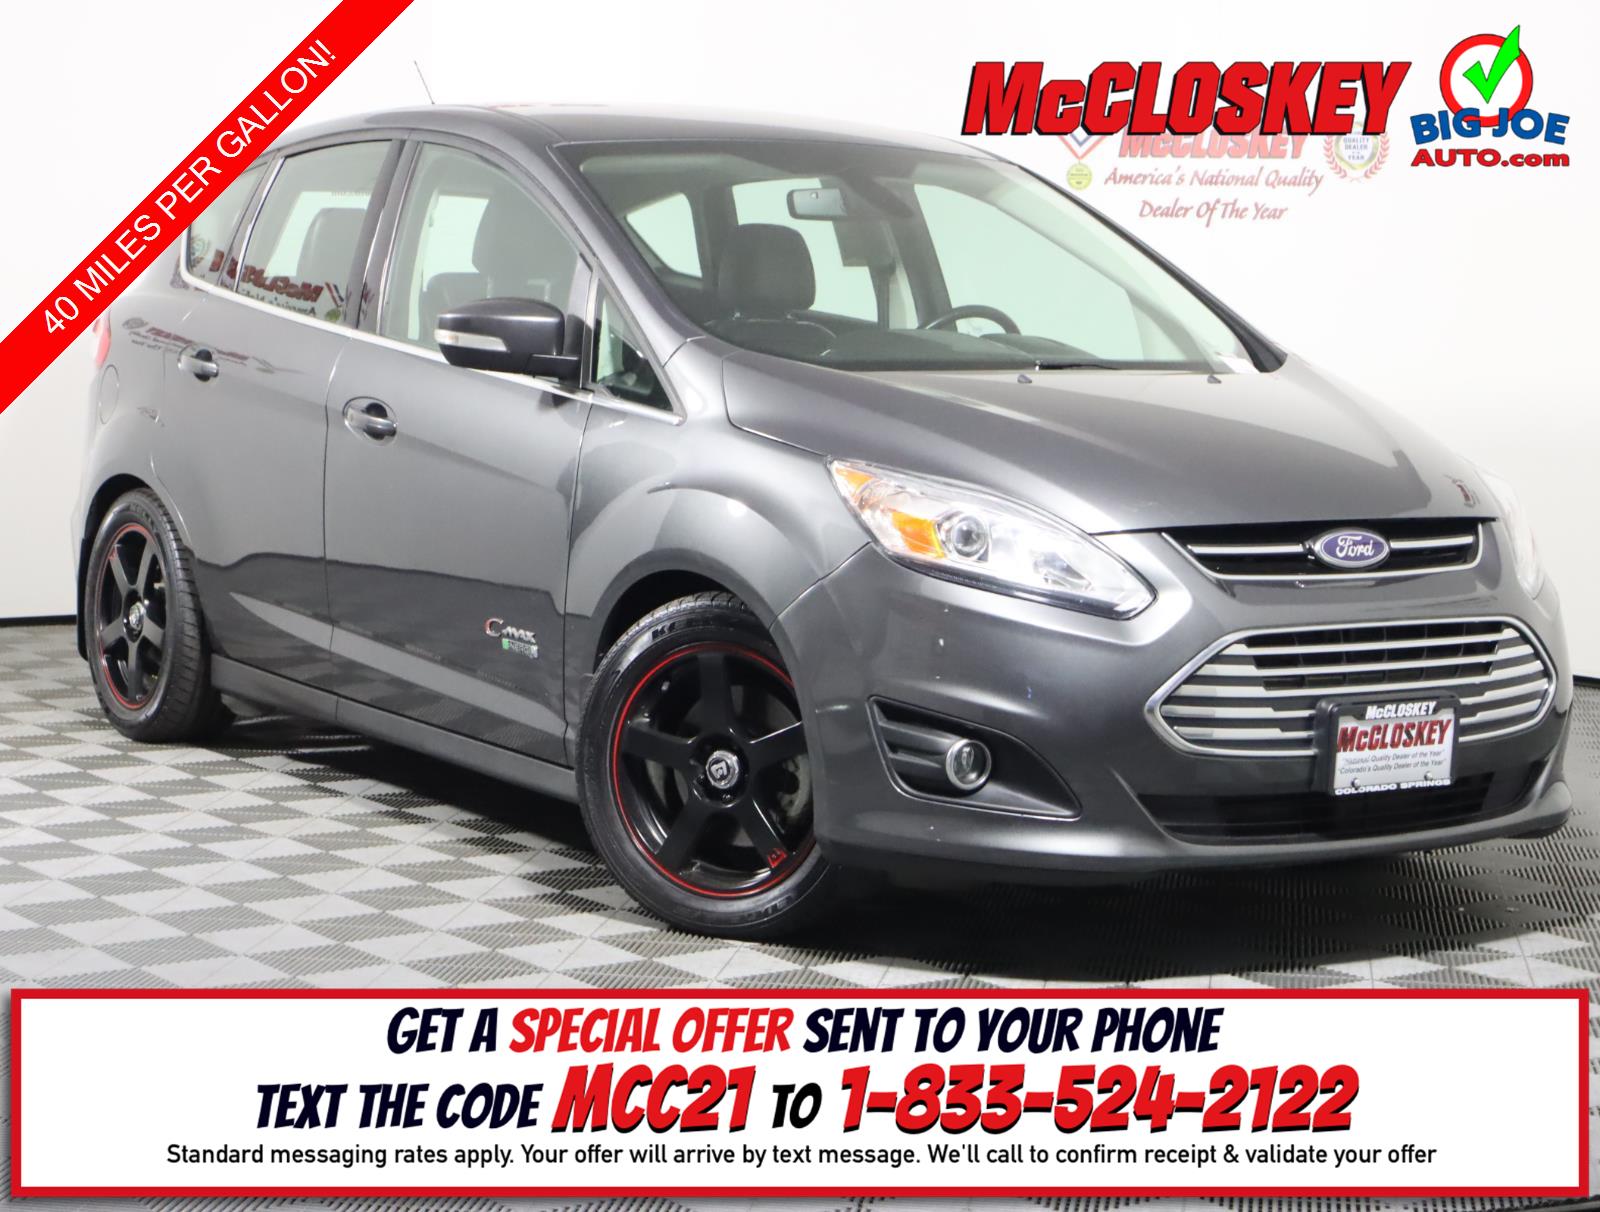 Preowned 2017 FORD C-max Titanium 40 MILES PER GALLON! for sale by McCloskey Imports & 4X4's in Colorado Springs, CO